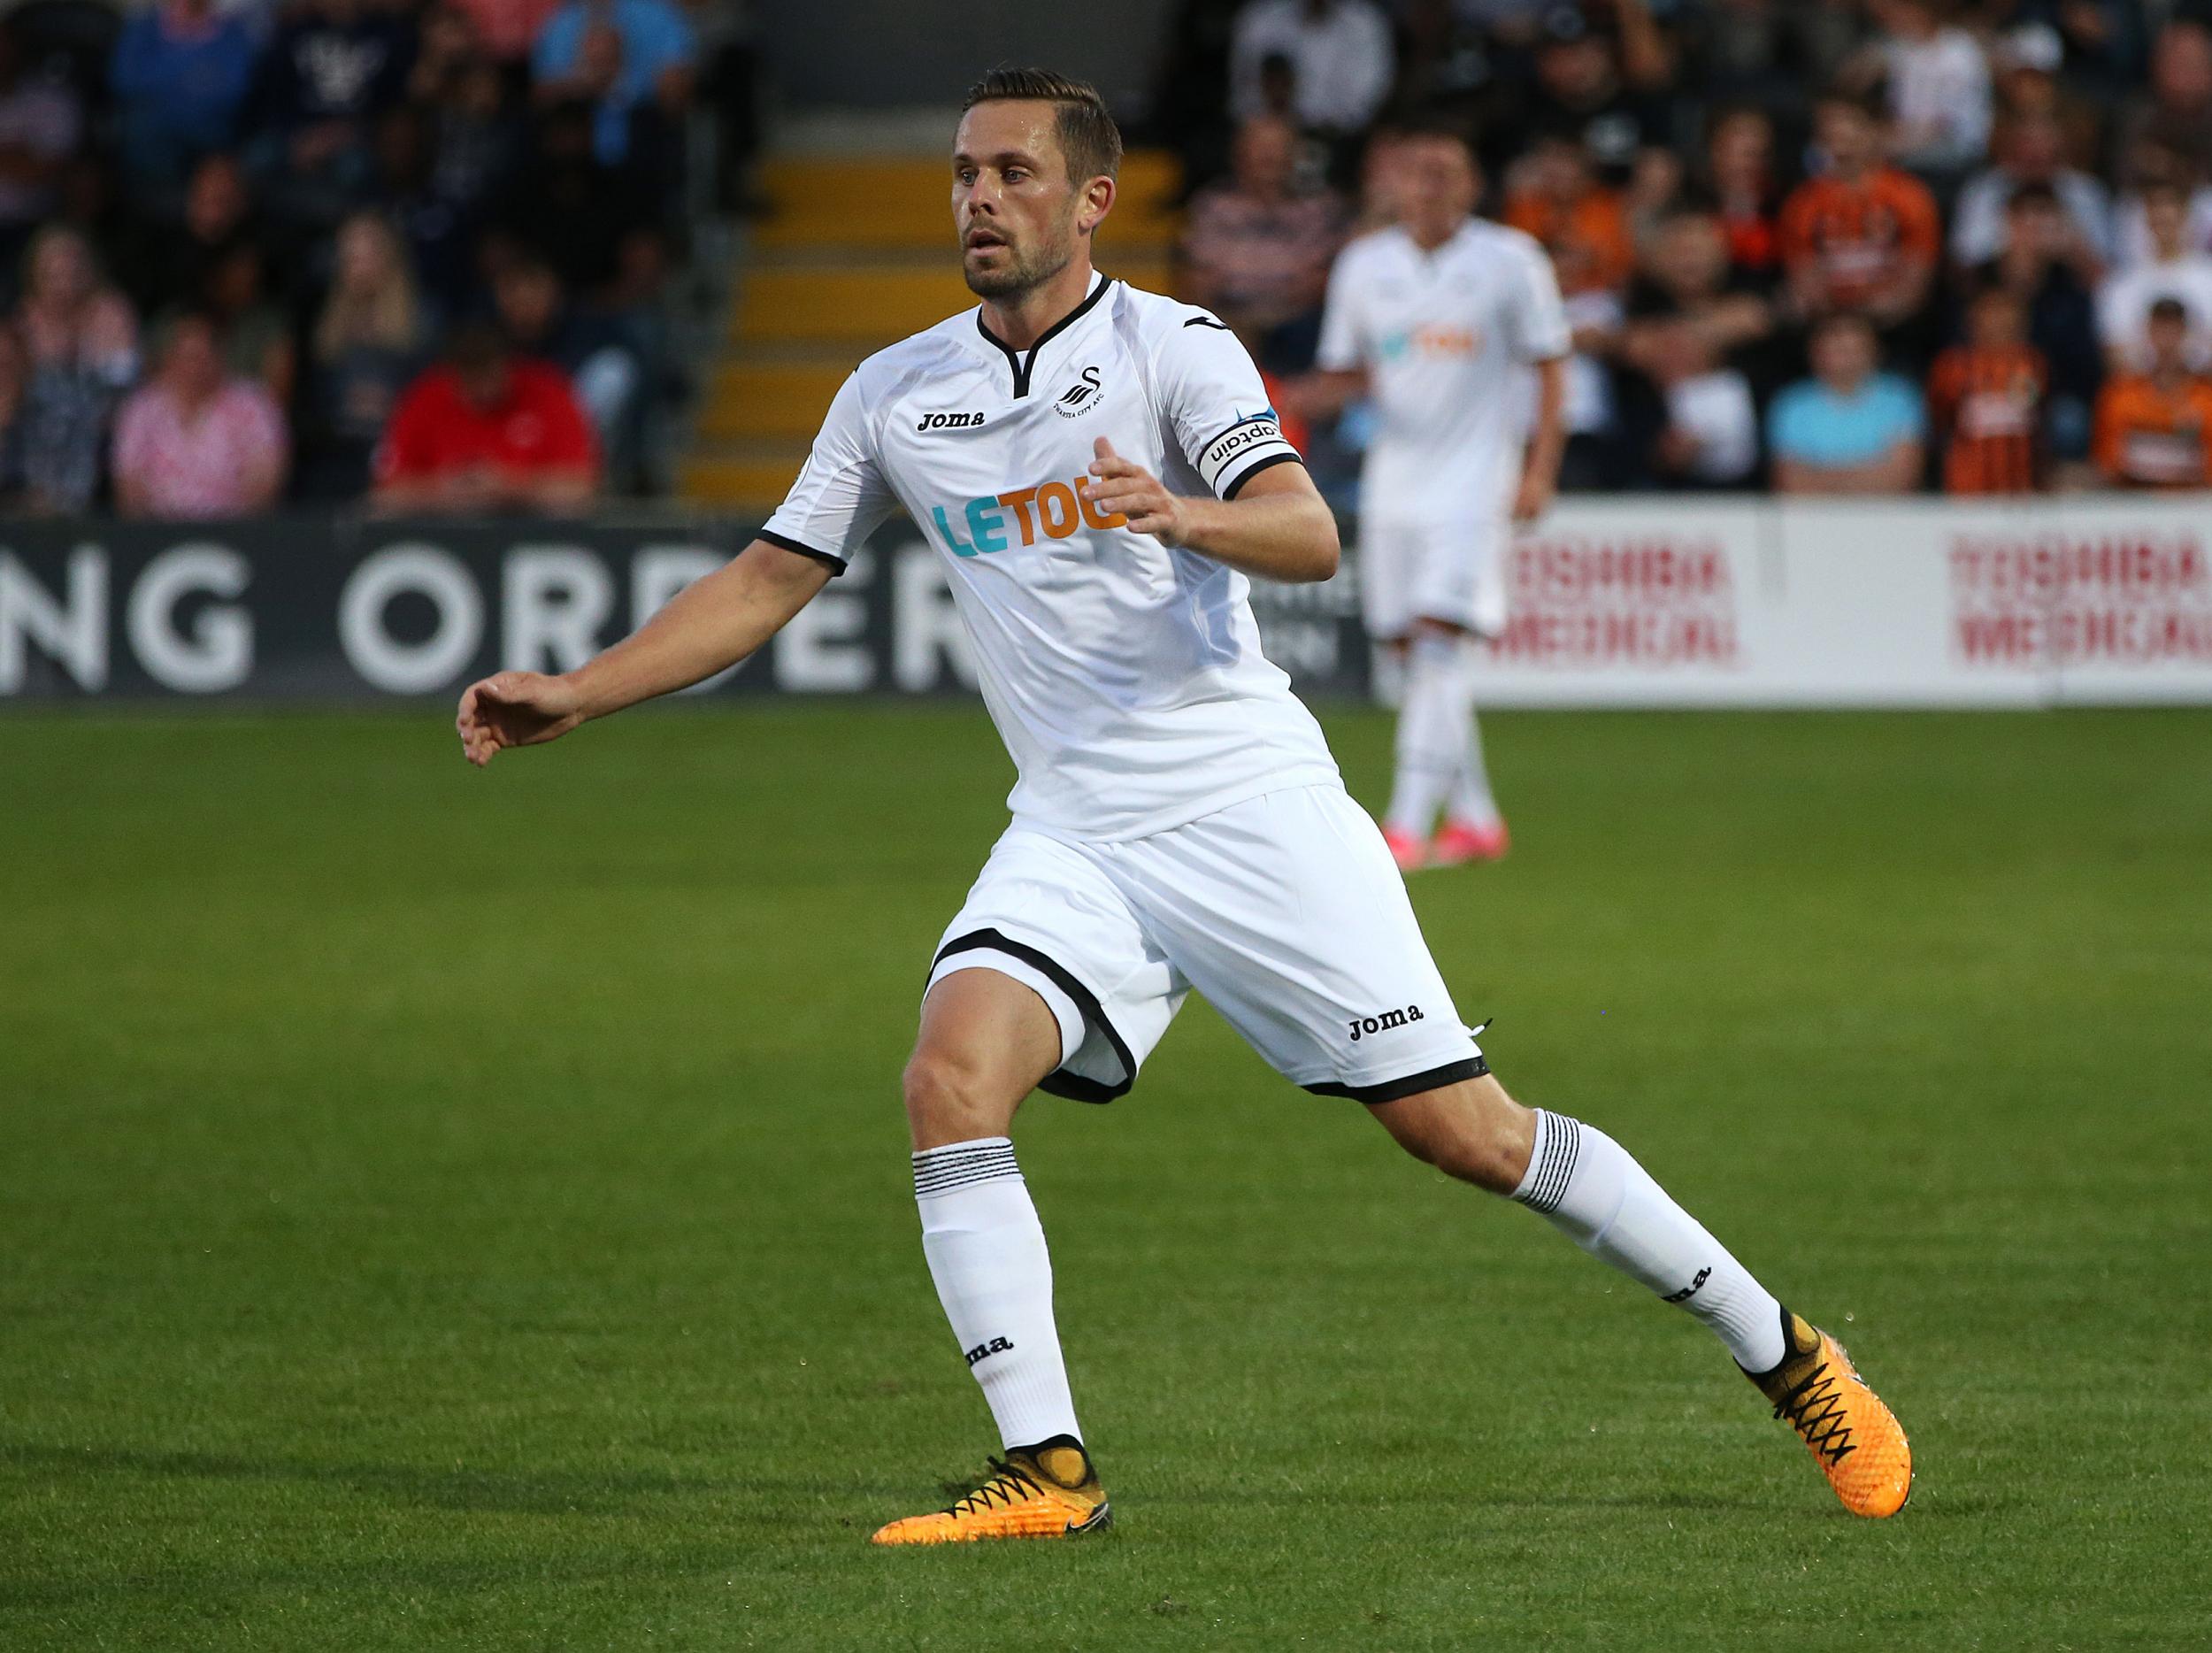 Gylfi Sigurdsson has been linked to Everton, Tottenham and Leicester